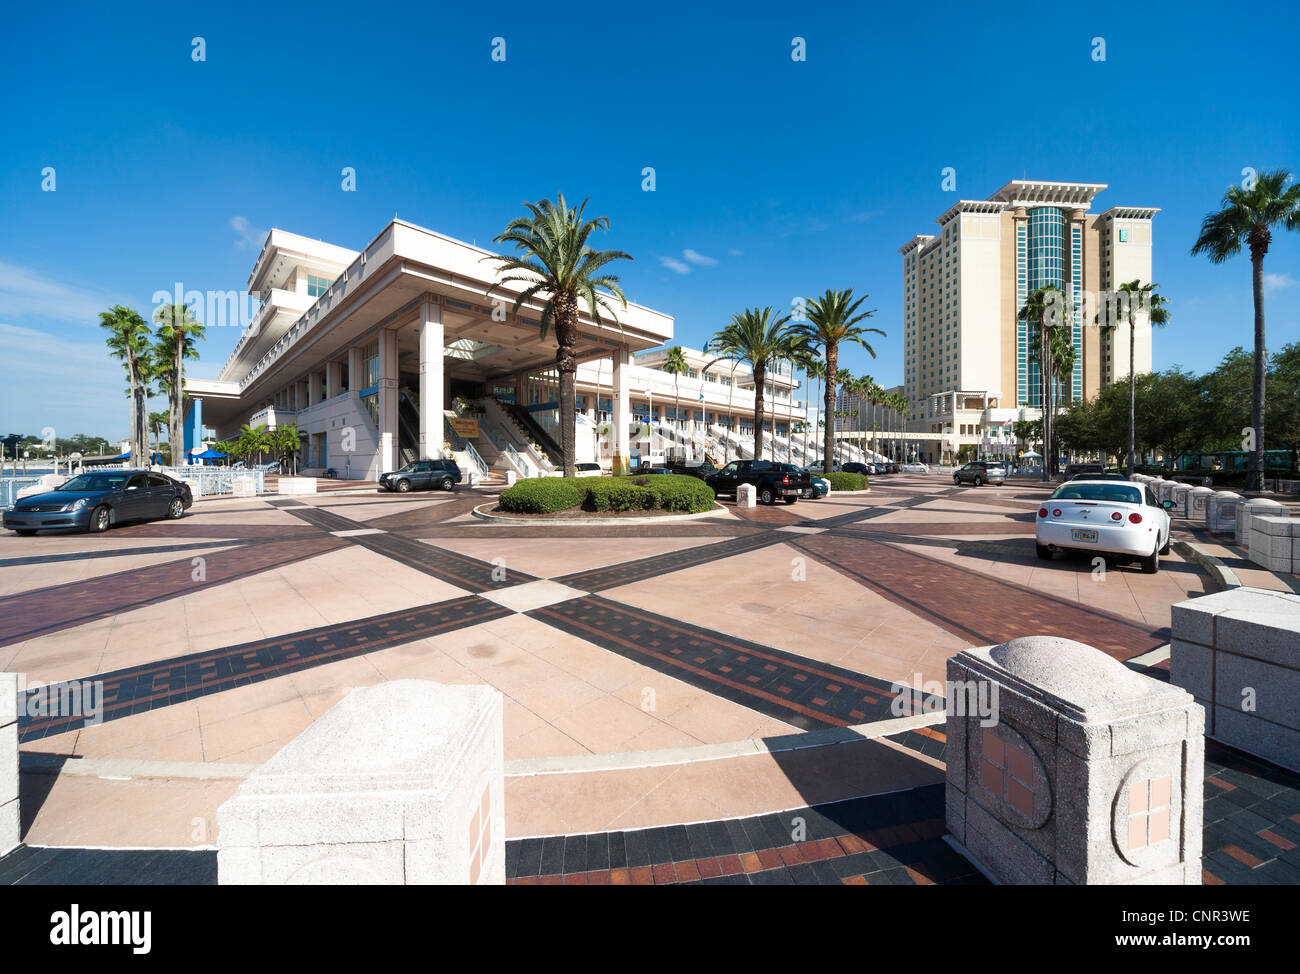 City of Tampa Florida, Tampa Convention Center building exterior with main entrance.Tampa Bay Area, Fl US USA Stock Photo